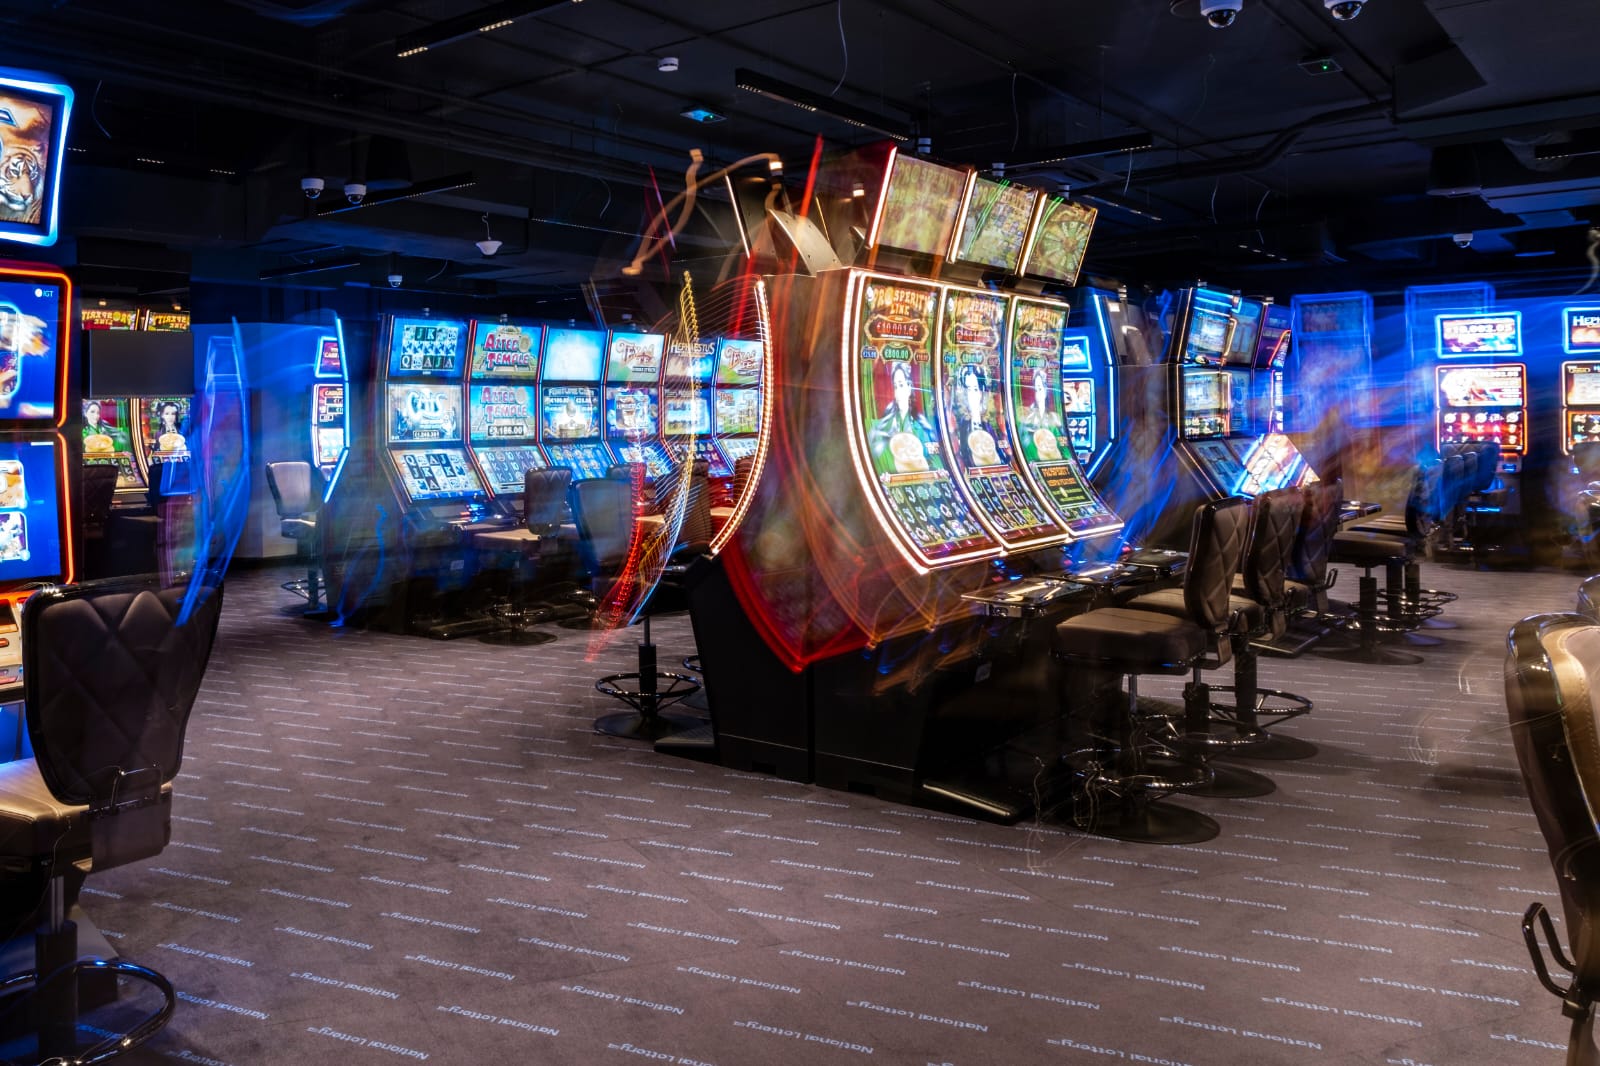 Gaming venue interior with rows of Historical Horse Racing terminals